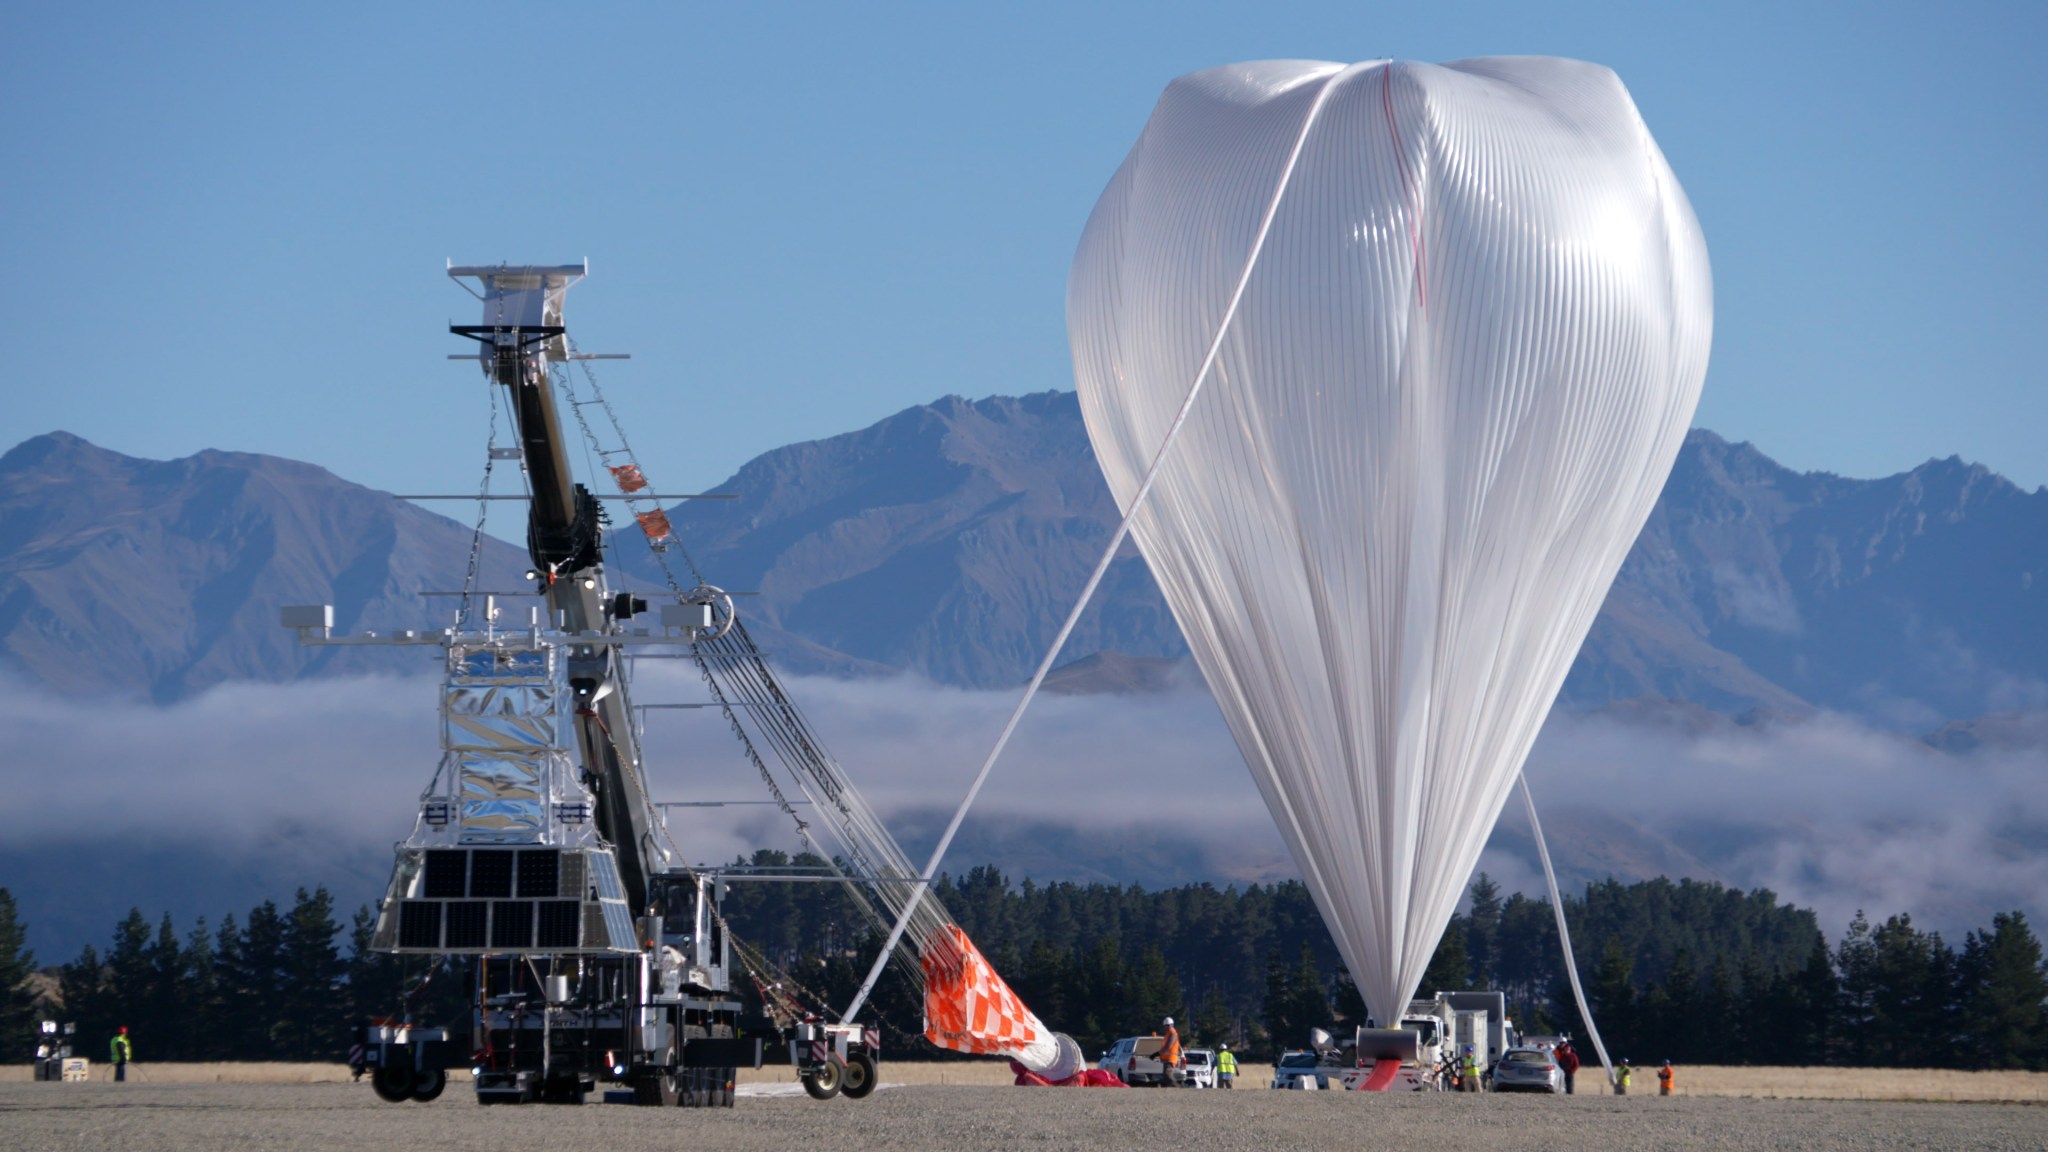 NASA's Super Pressure Balloon is fully inflated and ready for launch.